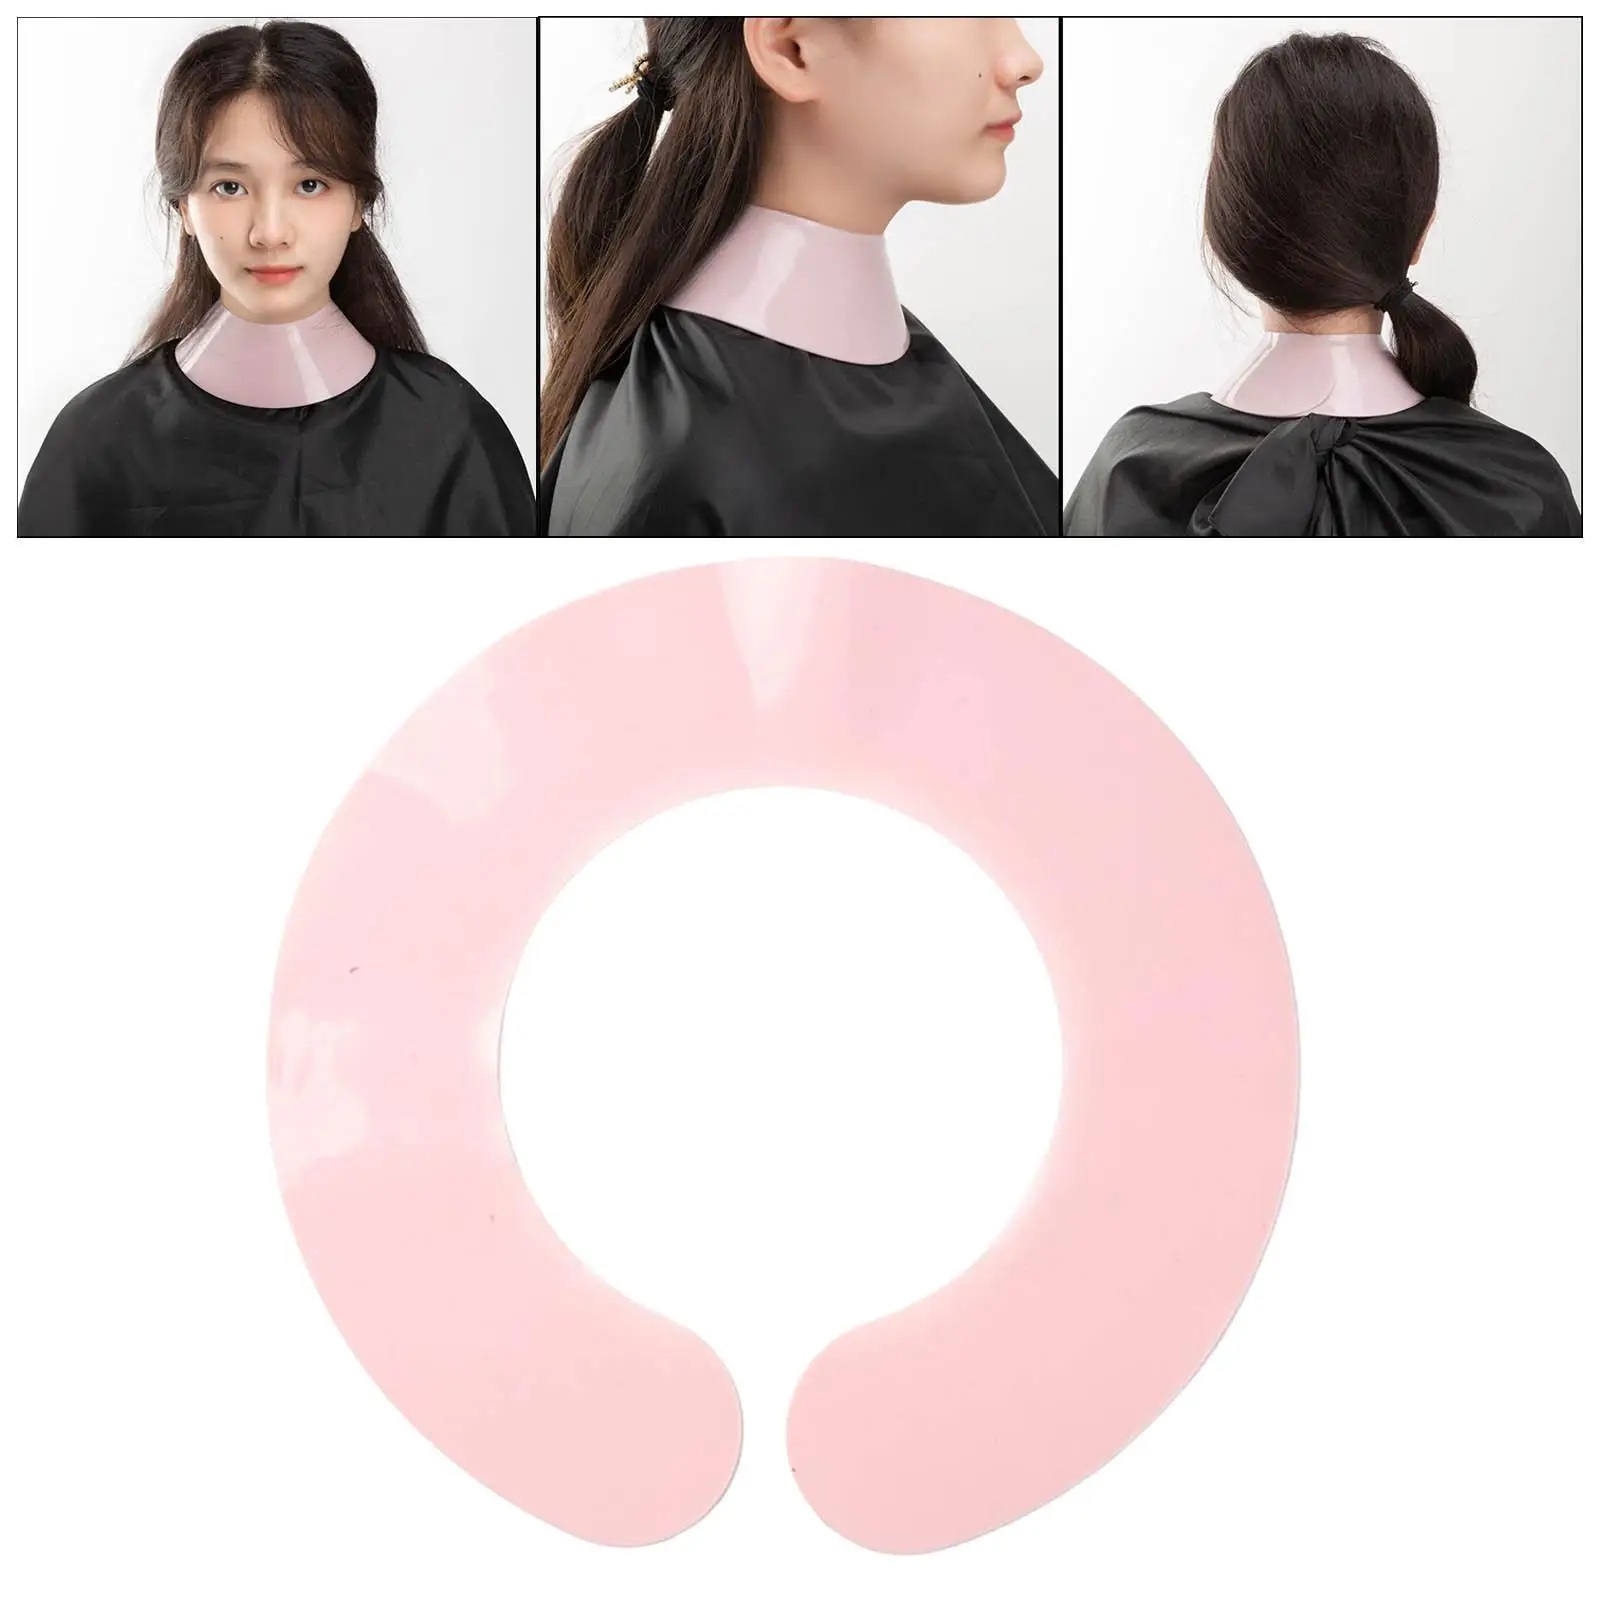 Professional Hair Cutting Collar Silicone Neck Wrap for Hair Dye Hair Coloring for Adults Kids Neck Shawl Adjustable Closure